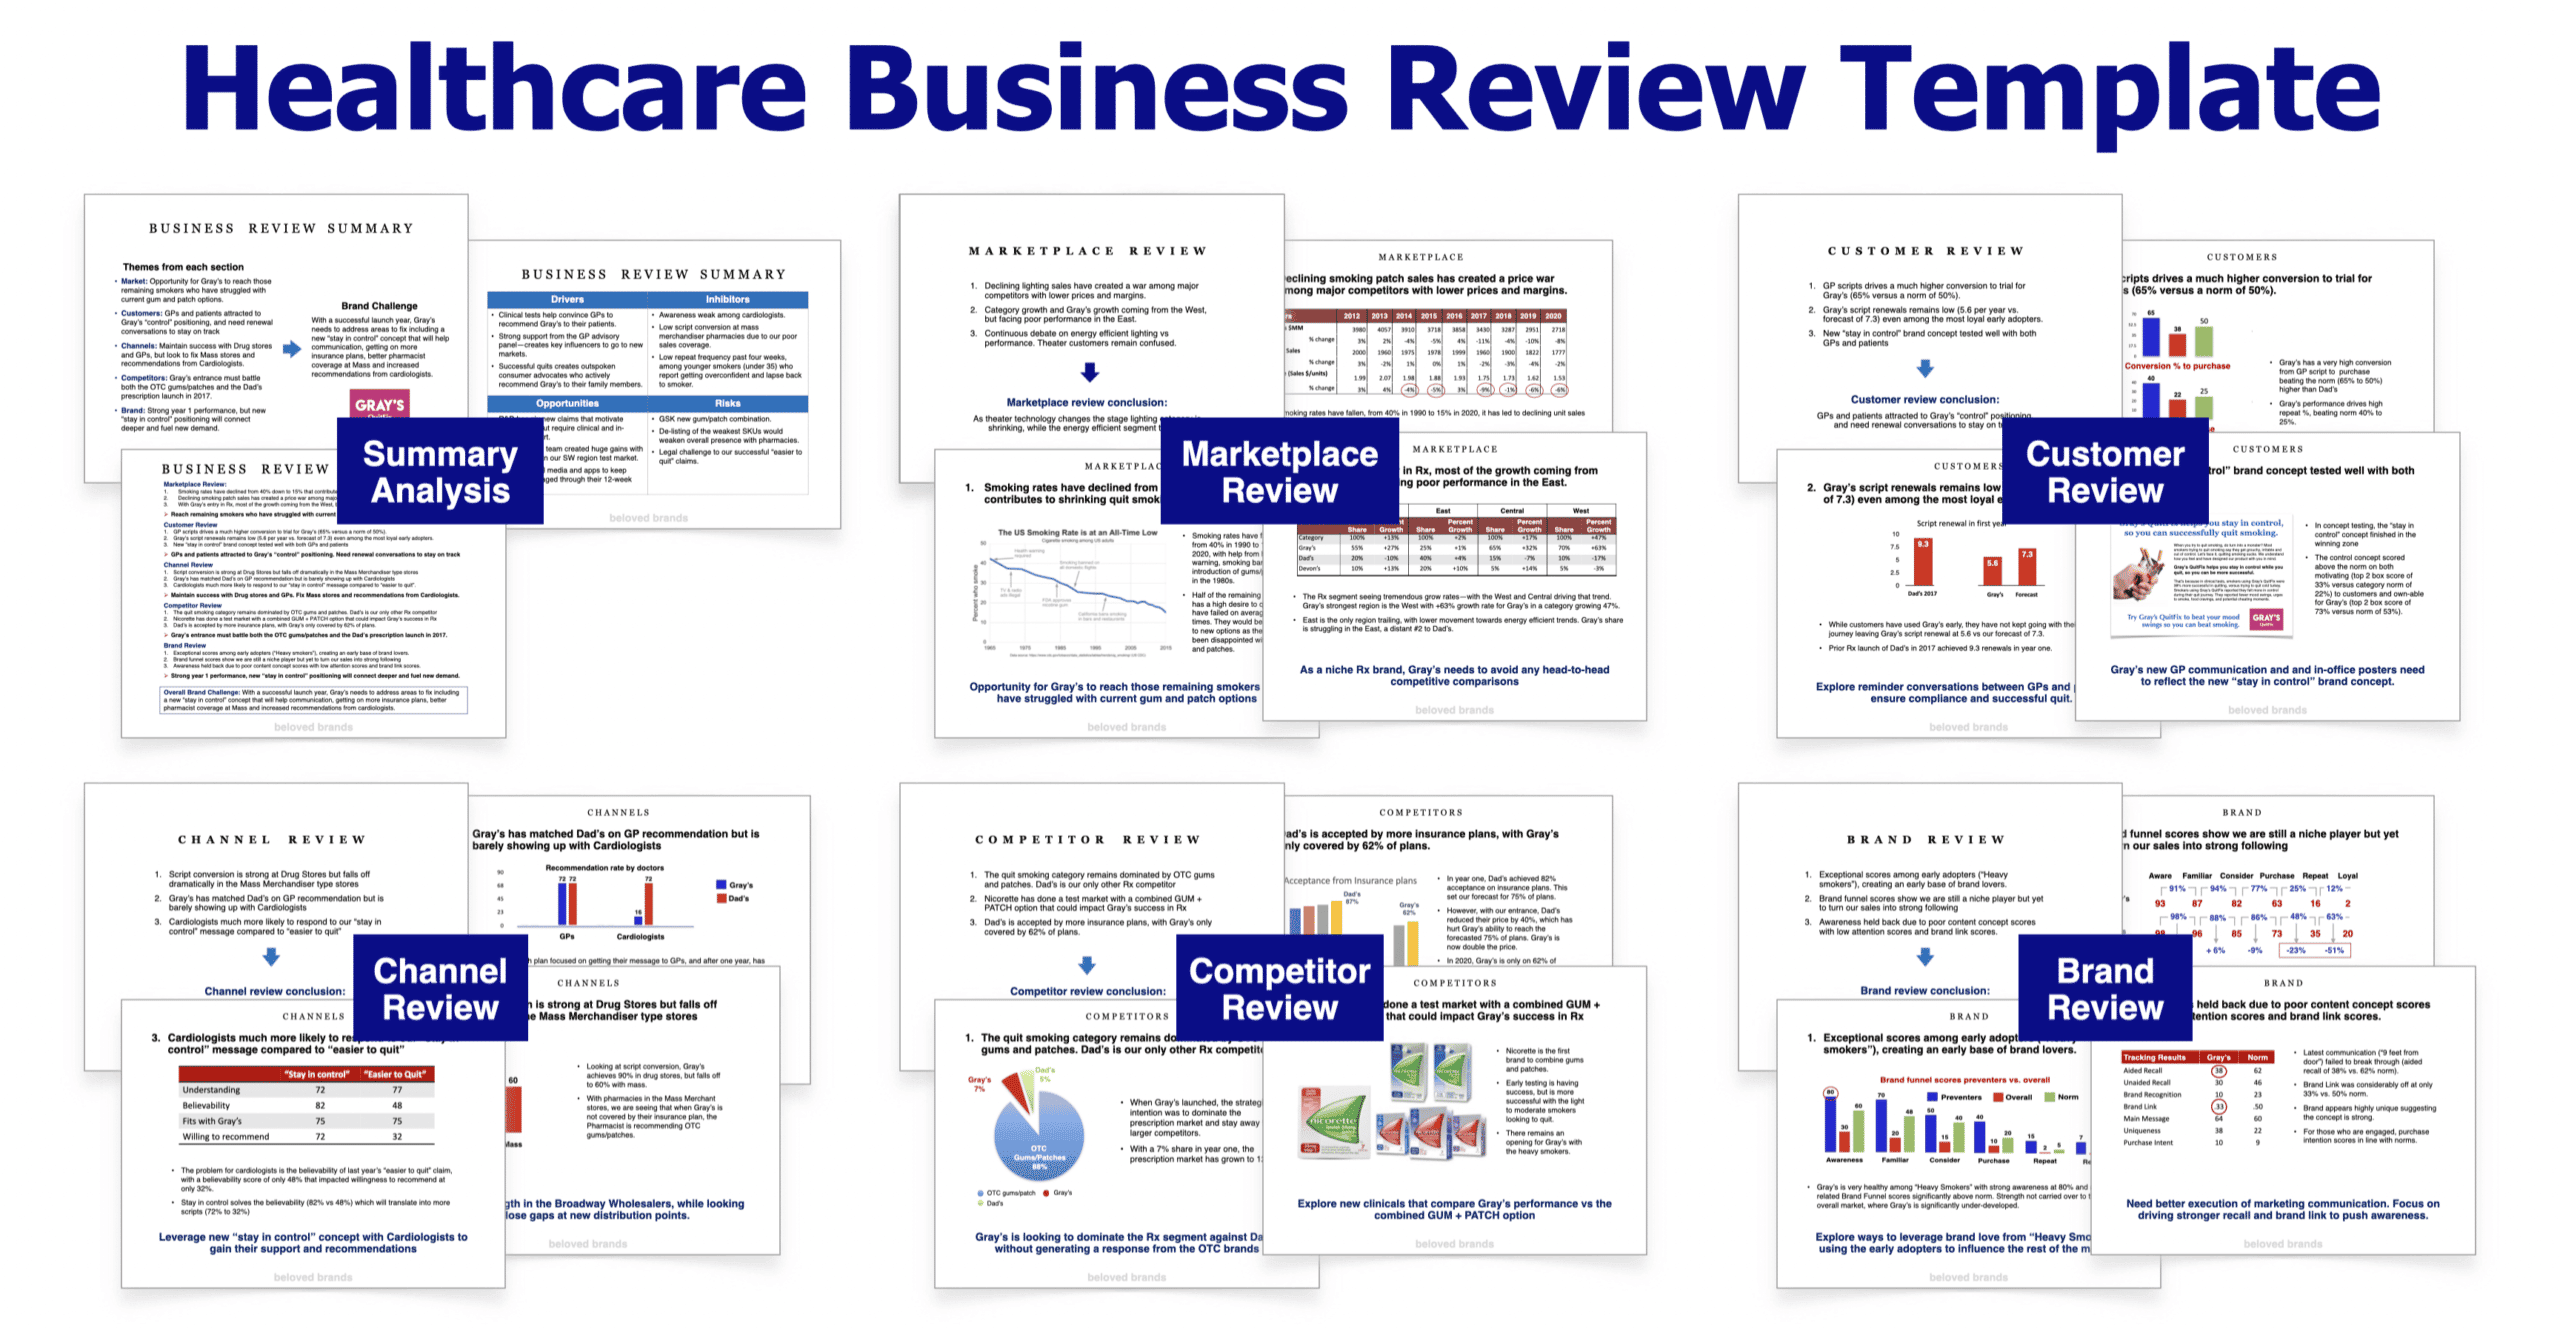 Healthcare Business Review Template for the Healthcare Brand Toolkit